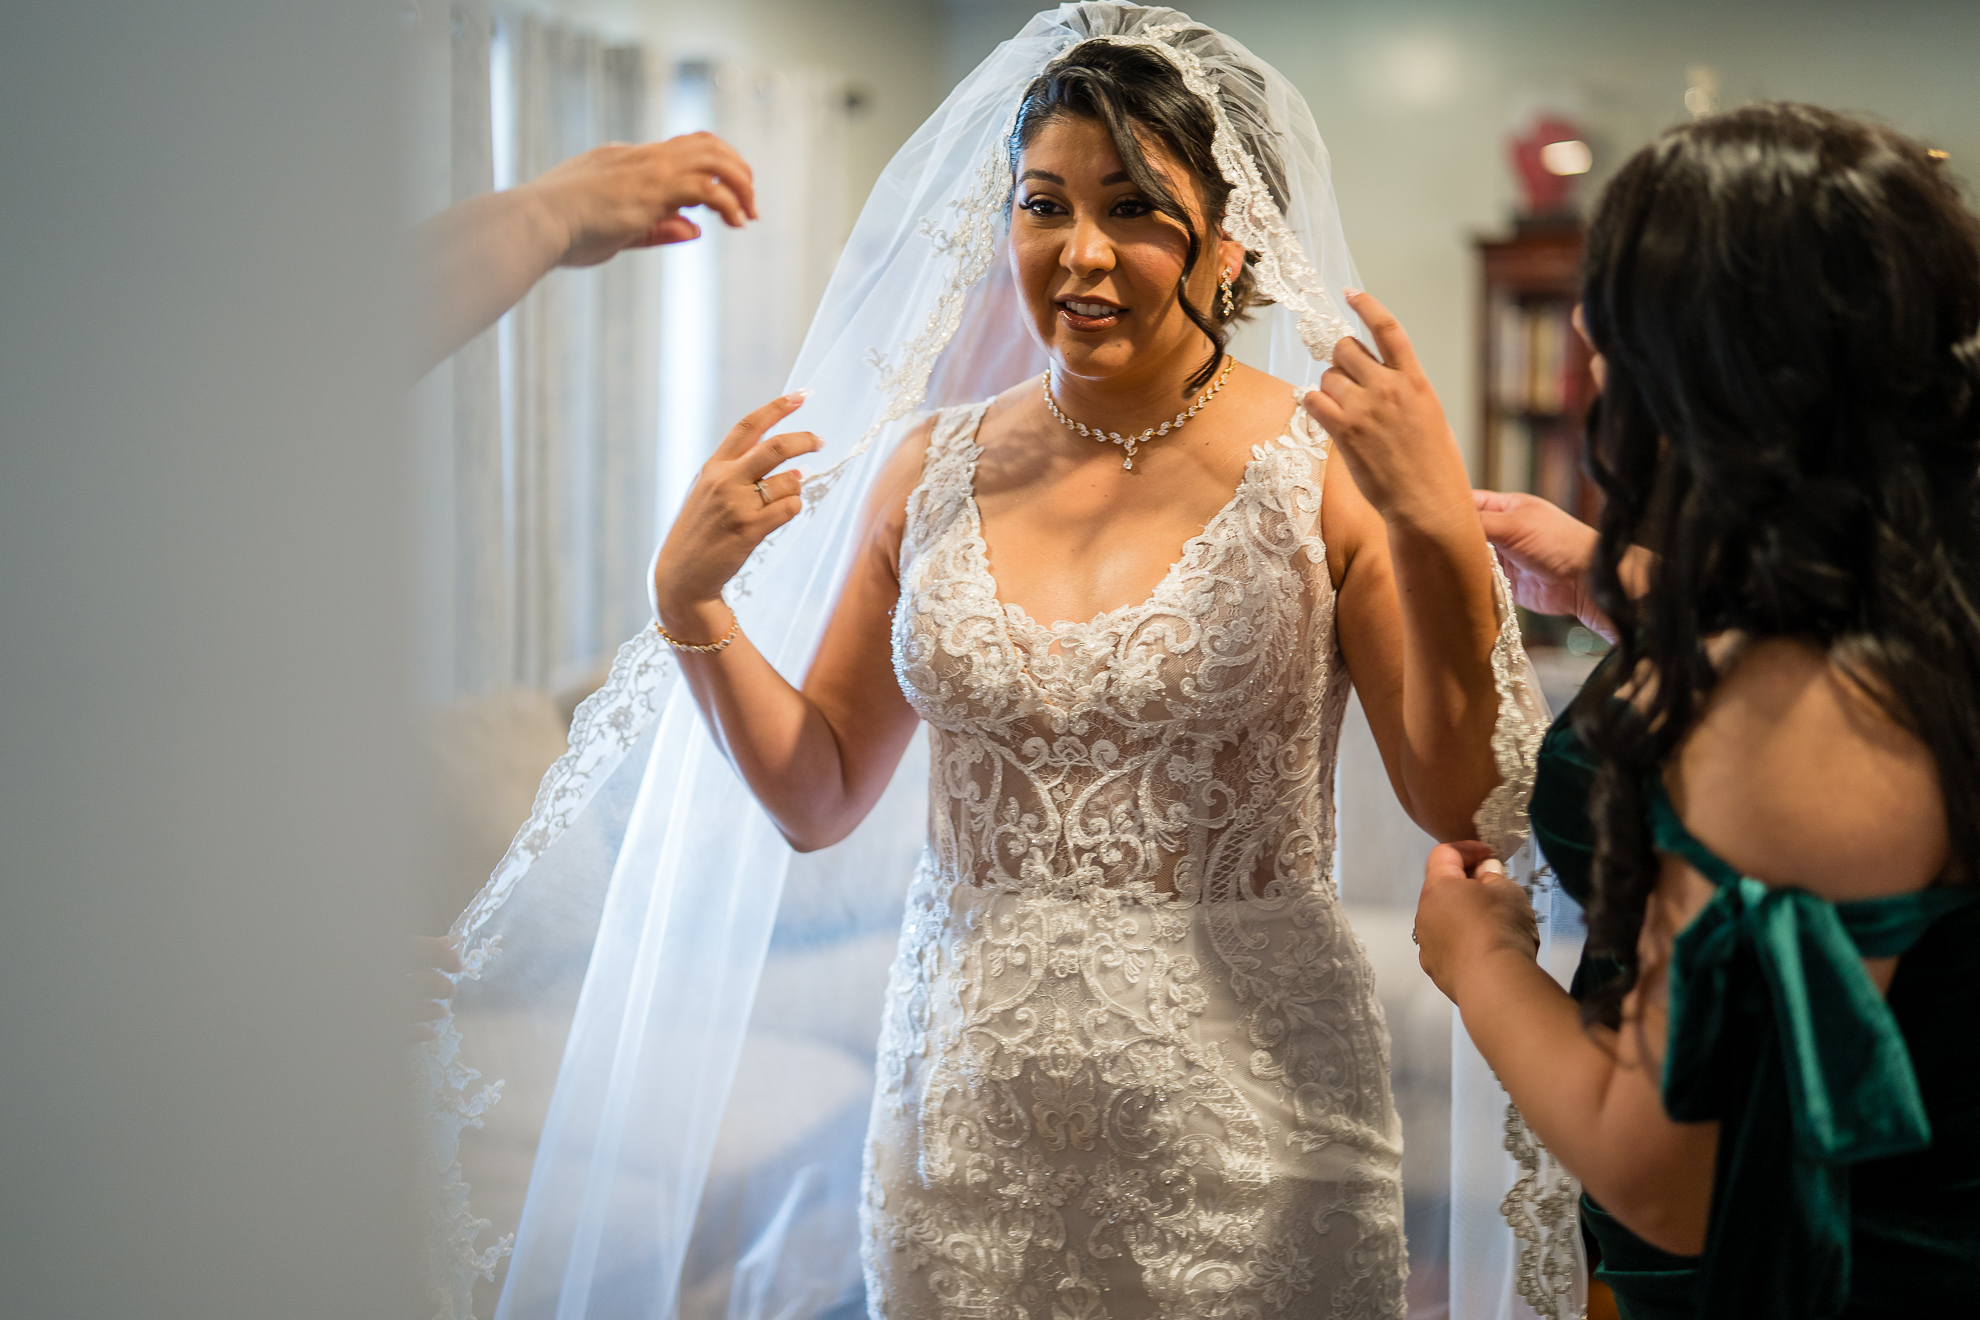 ThomasKim_photography A bride getting ready for her wedding with her S.O.